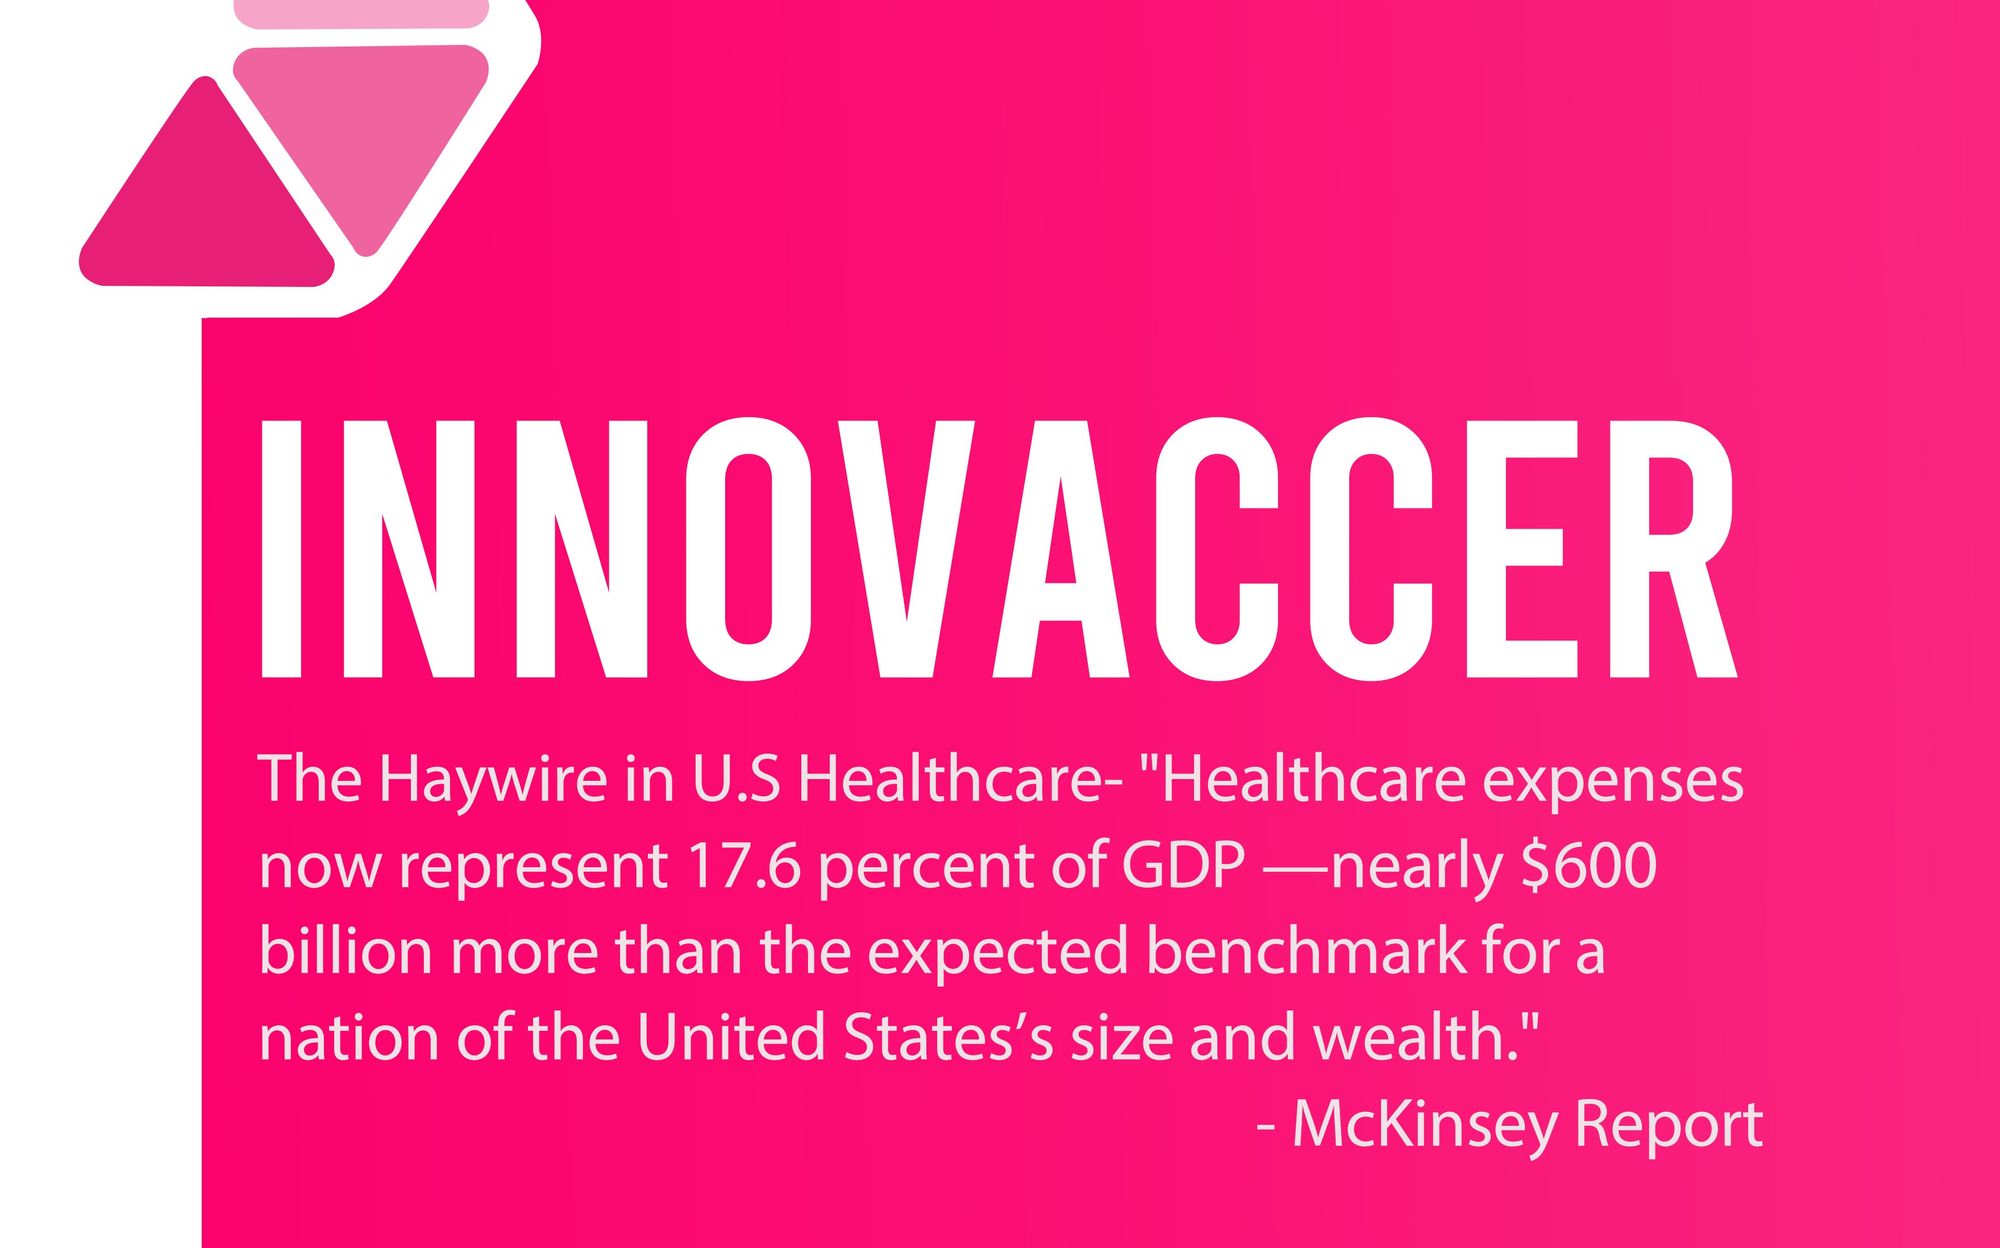 Innovaccer-Helping healthcare work as one